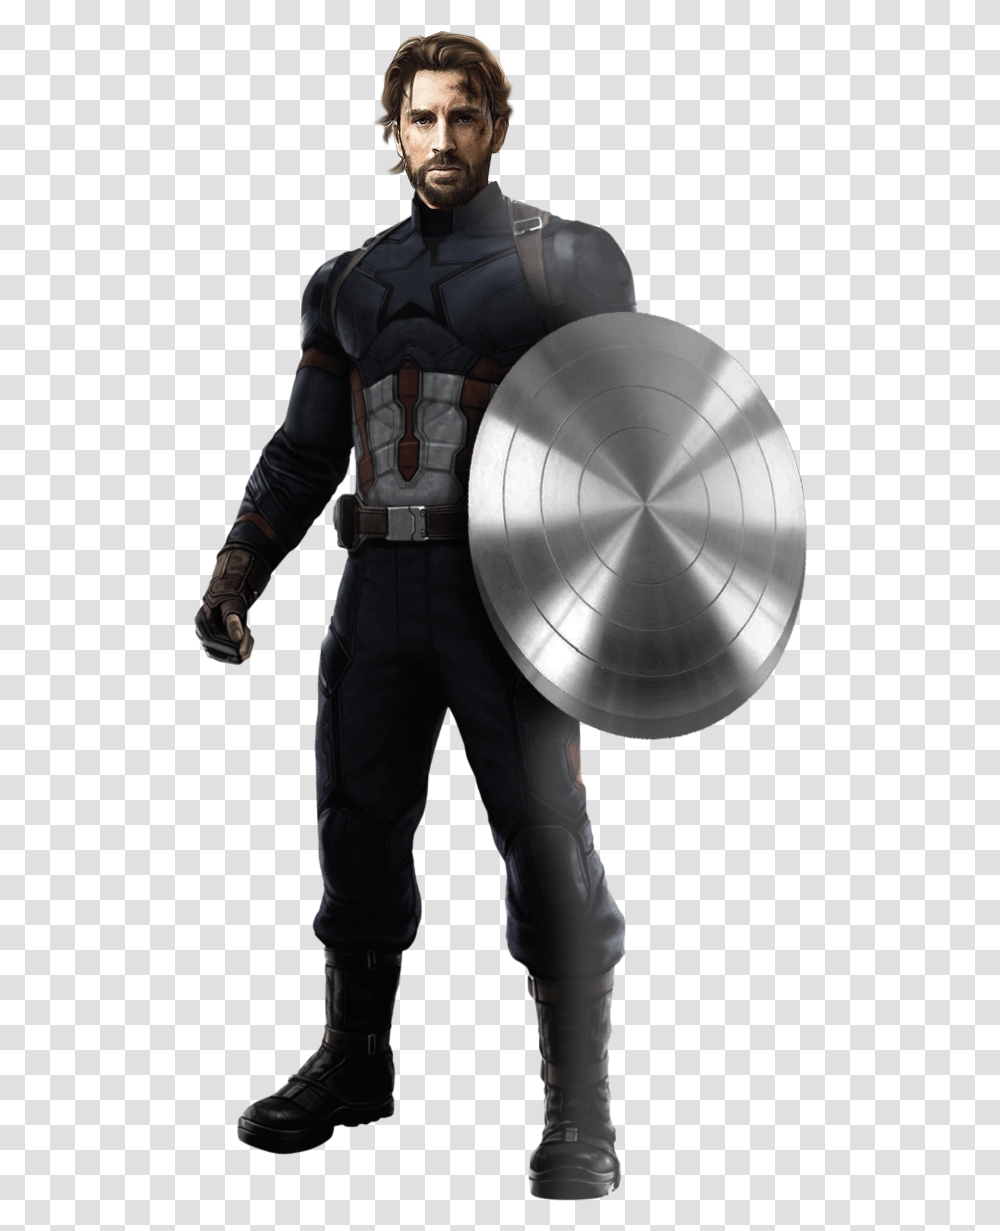 Captain America Avengers Infinity War By Luana Pngs Captain America Civil War Captain America, Person, Human, Armor, Costume Transparent Png